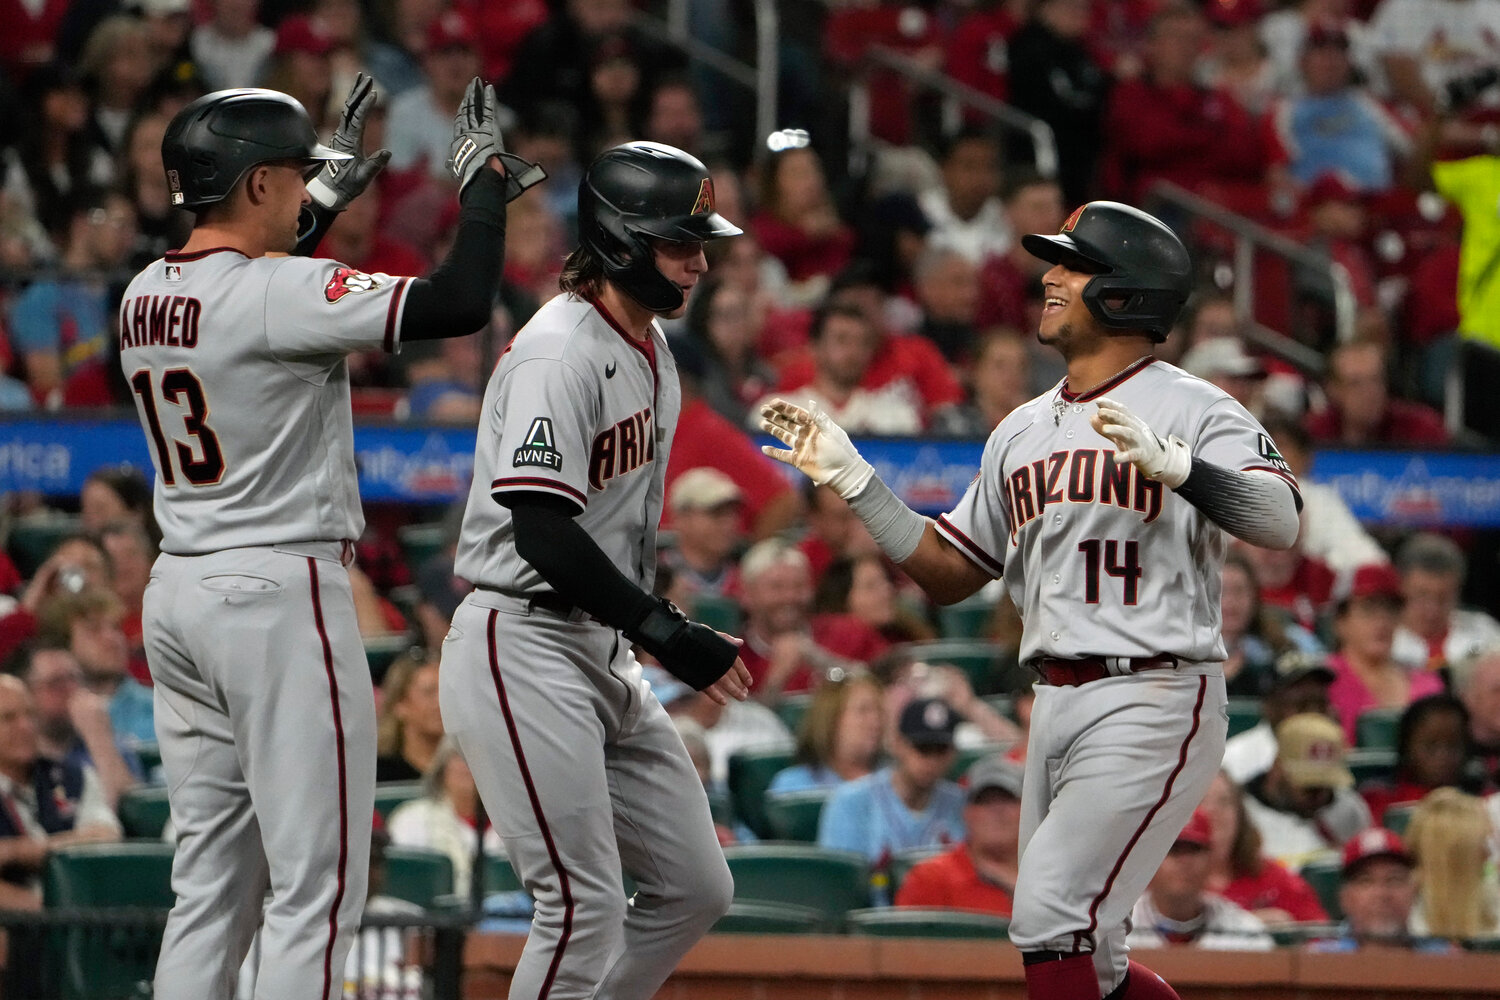 Arizona Diamondbacks' Gabriel Moreno (14) is congratulated by teammates Jake McCarthy and Nick Ahmed (13) after hitting a three-run home run during the fourth inning of their game against the St. Louis Cardinals on Tuesday in St. Louis. (AP Photo/Jeff Roberson)